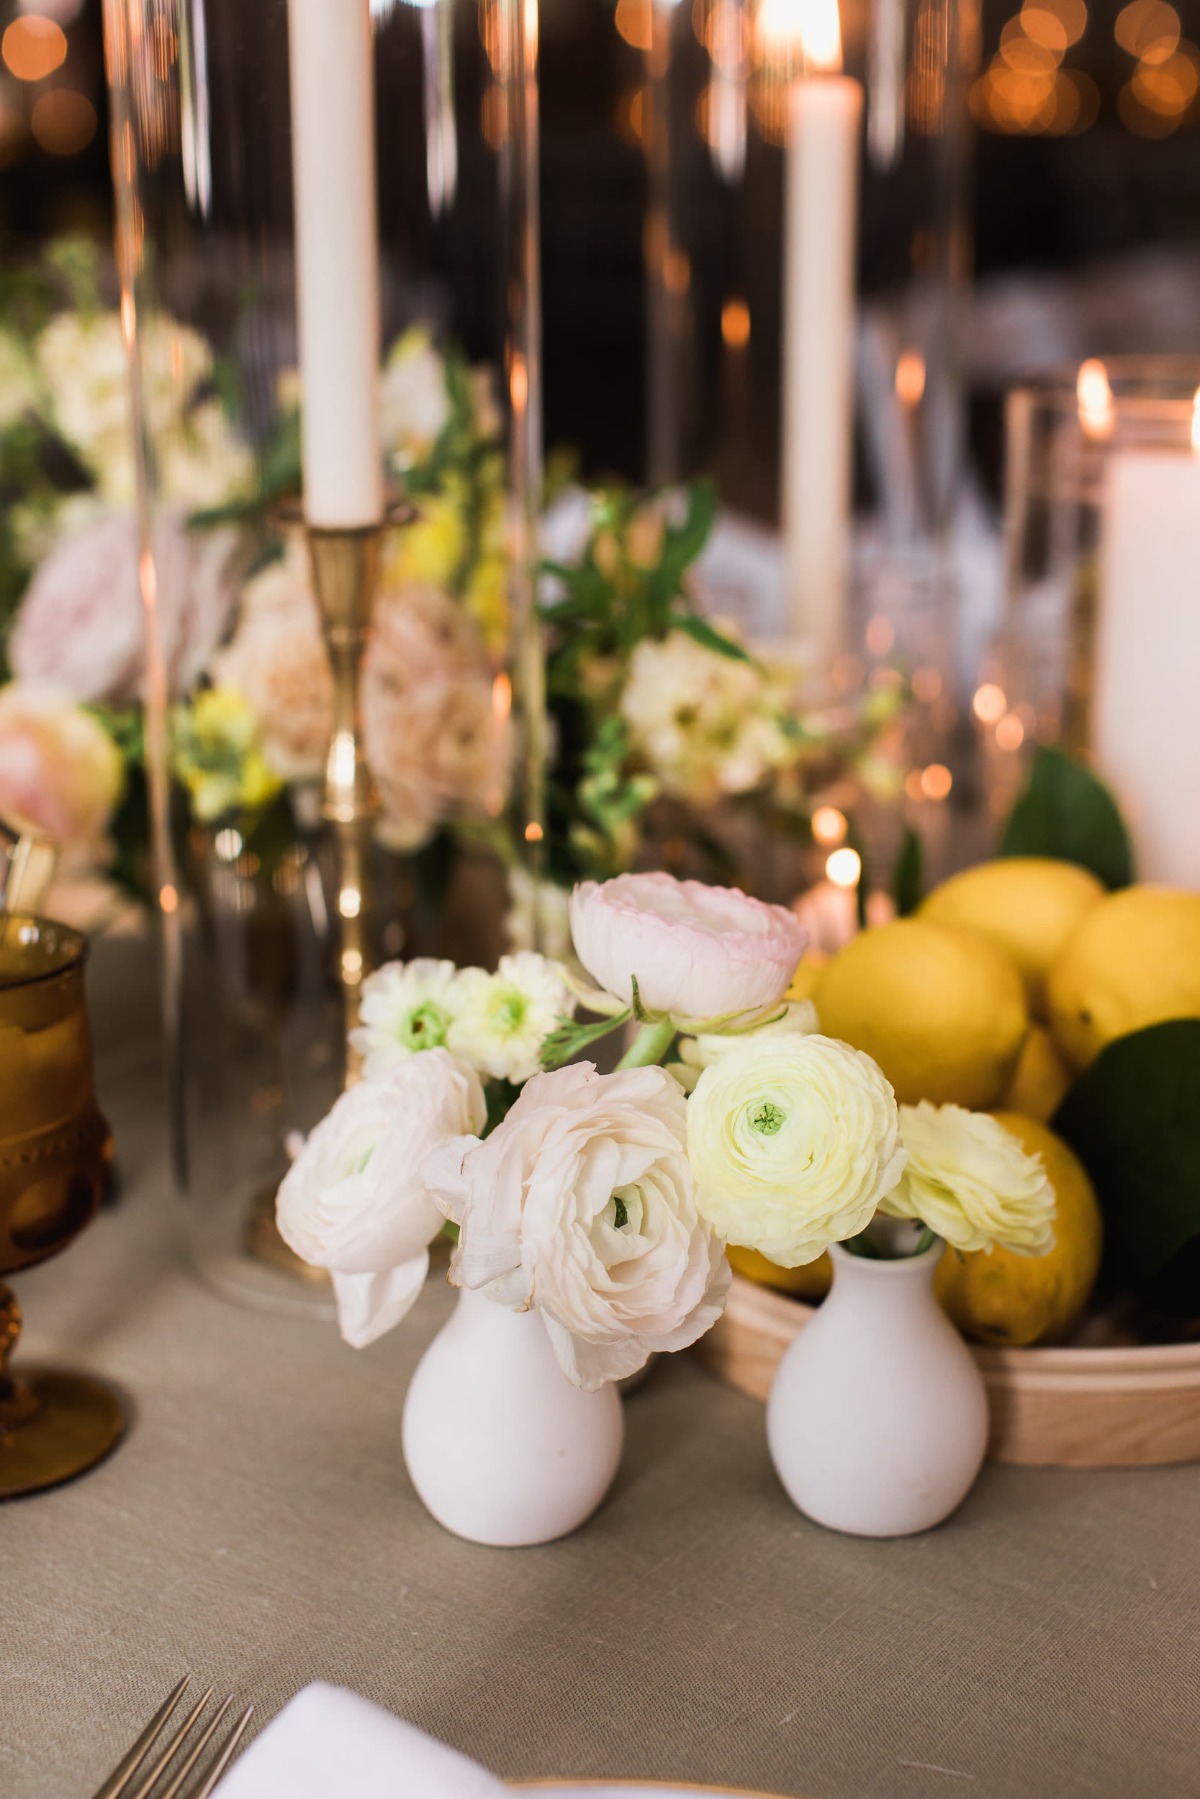 Easy wedding floral arrangement ideas use small vases filled with Sinnias